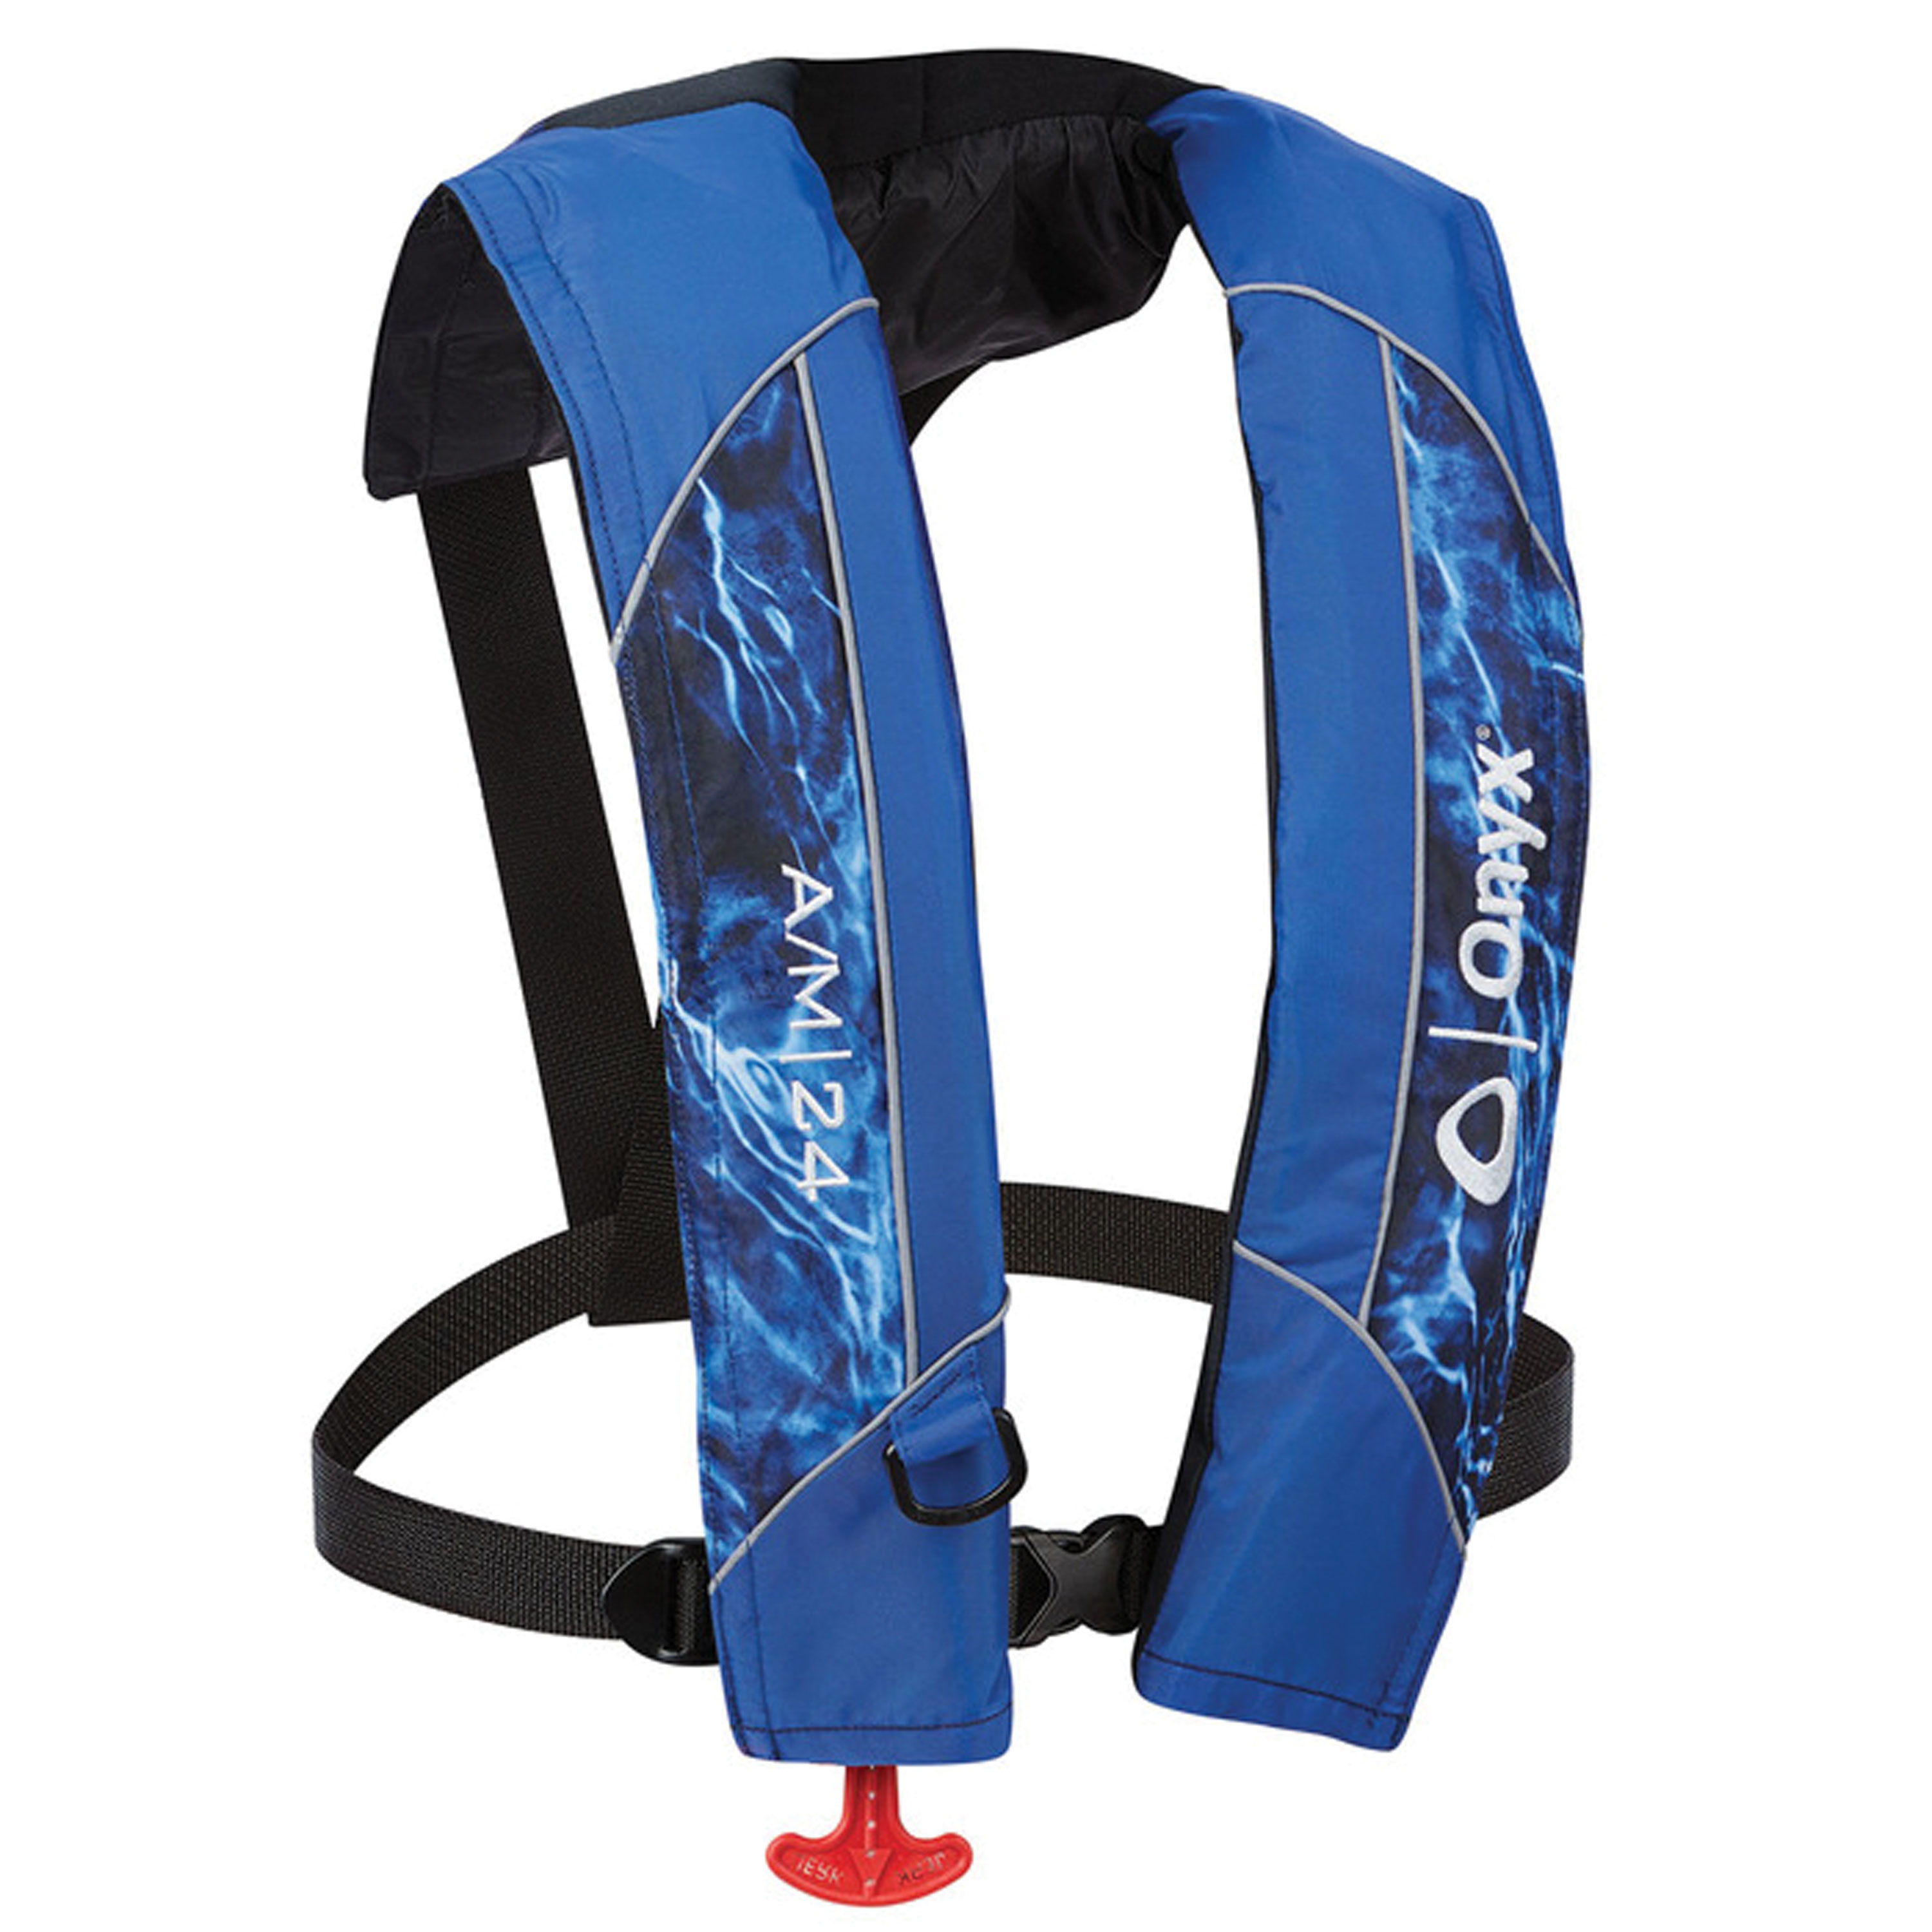 Onyx A/M-24 Automatic/Manual Inflatable Life Jacket - 132000-855-004-19